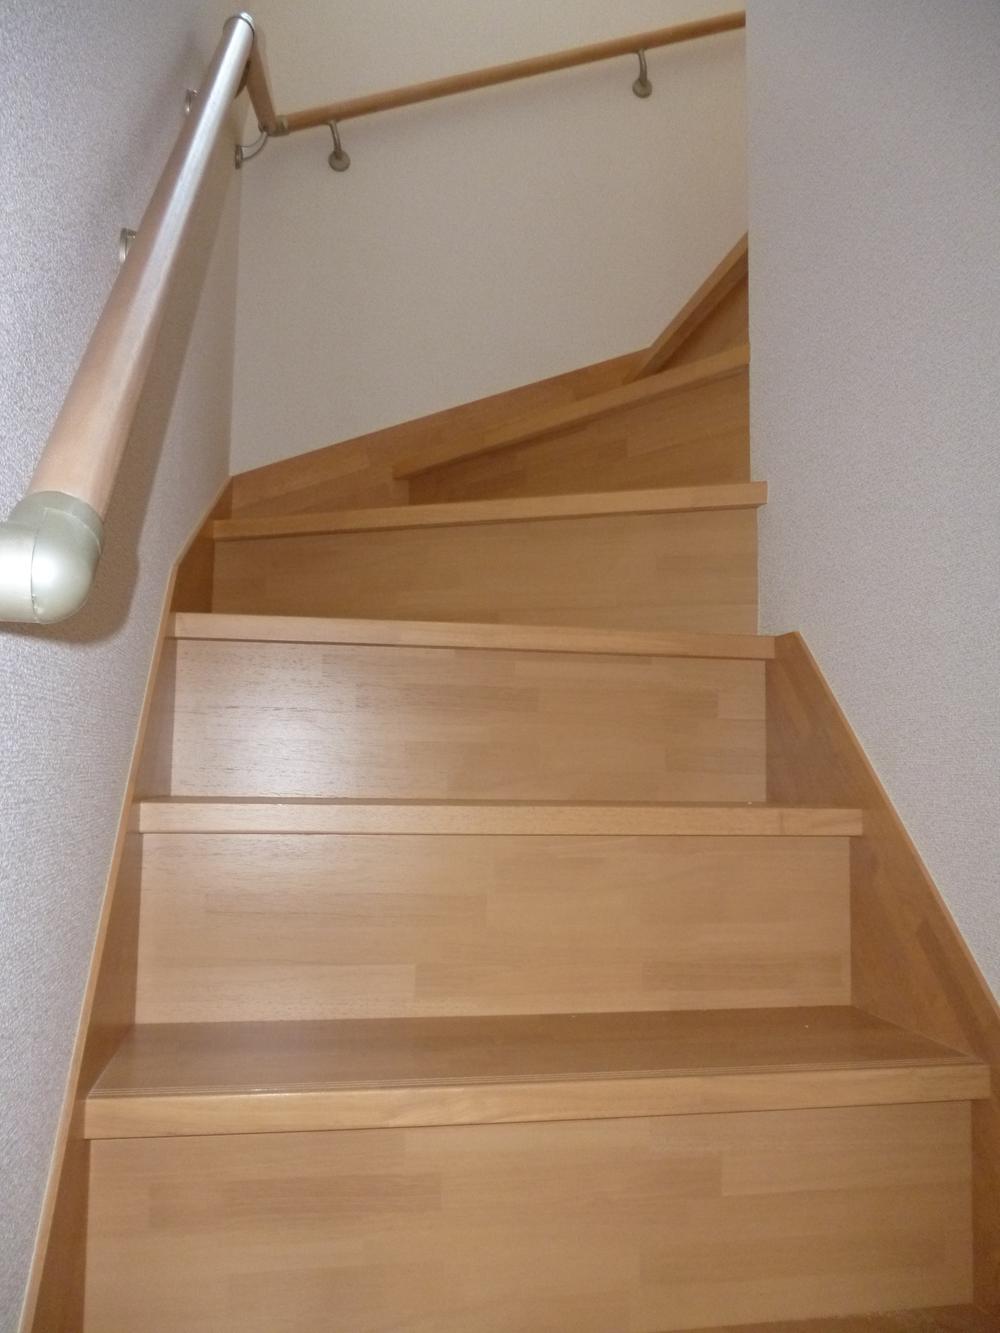 Other introspection. Spacious staircase with a handrail (910cm)